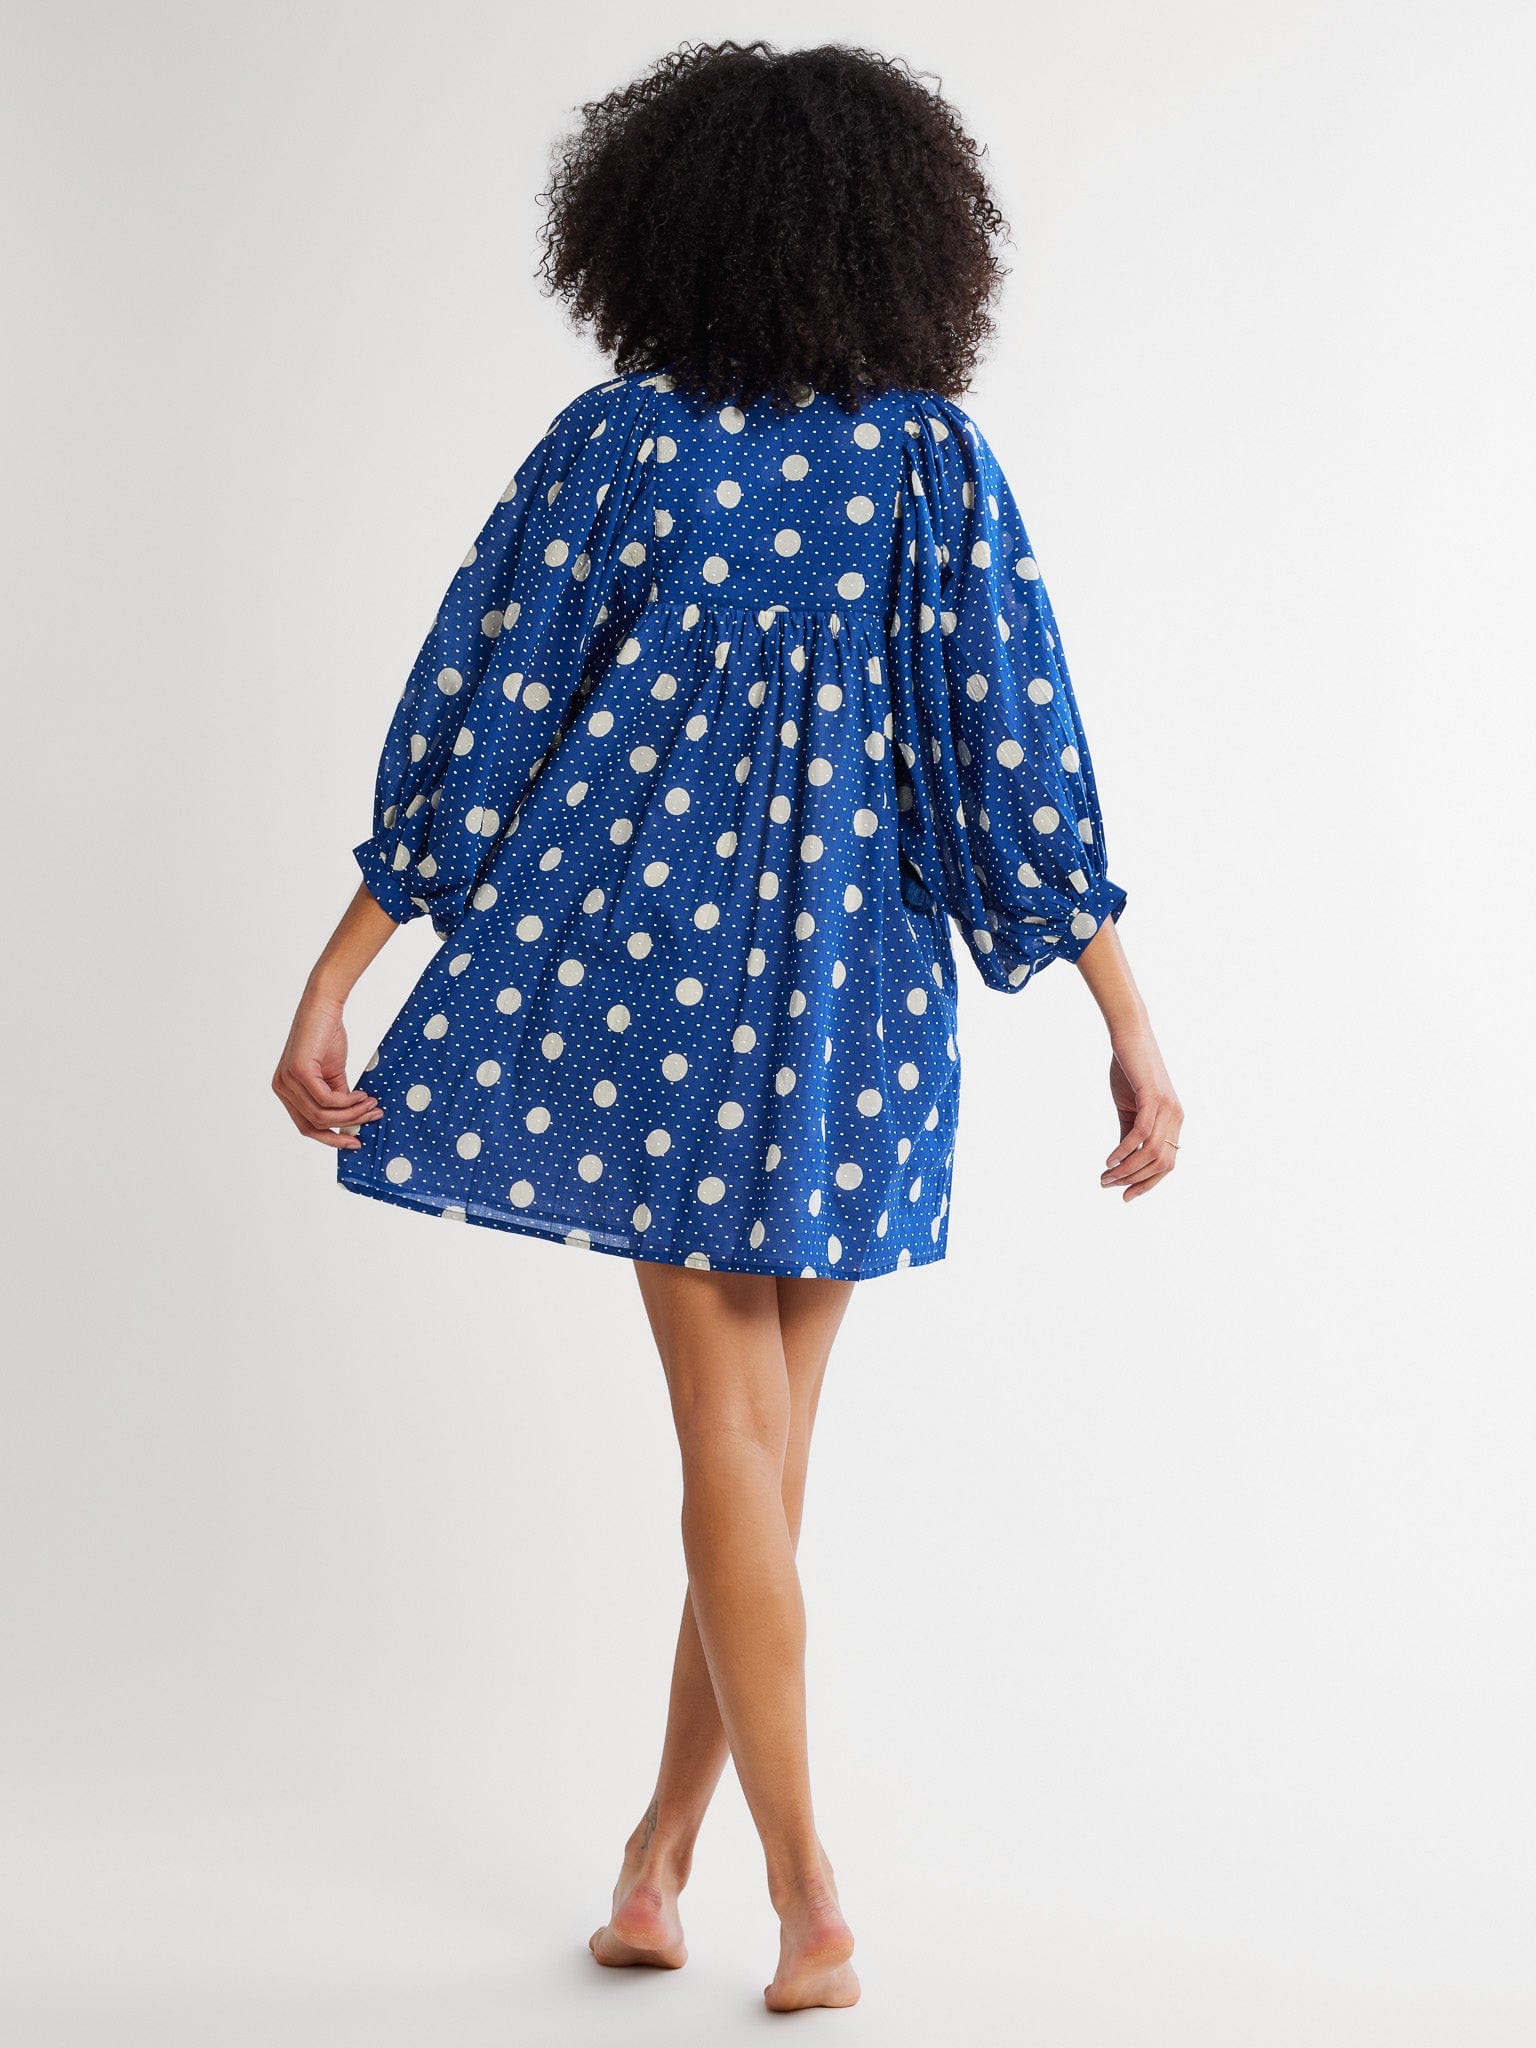 MILLE Clothing Daisy Dress in Summer Moon